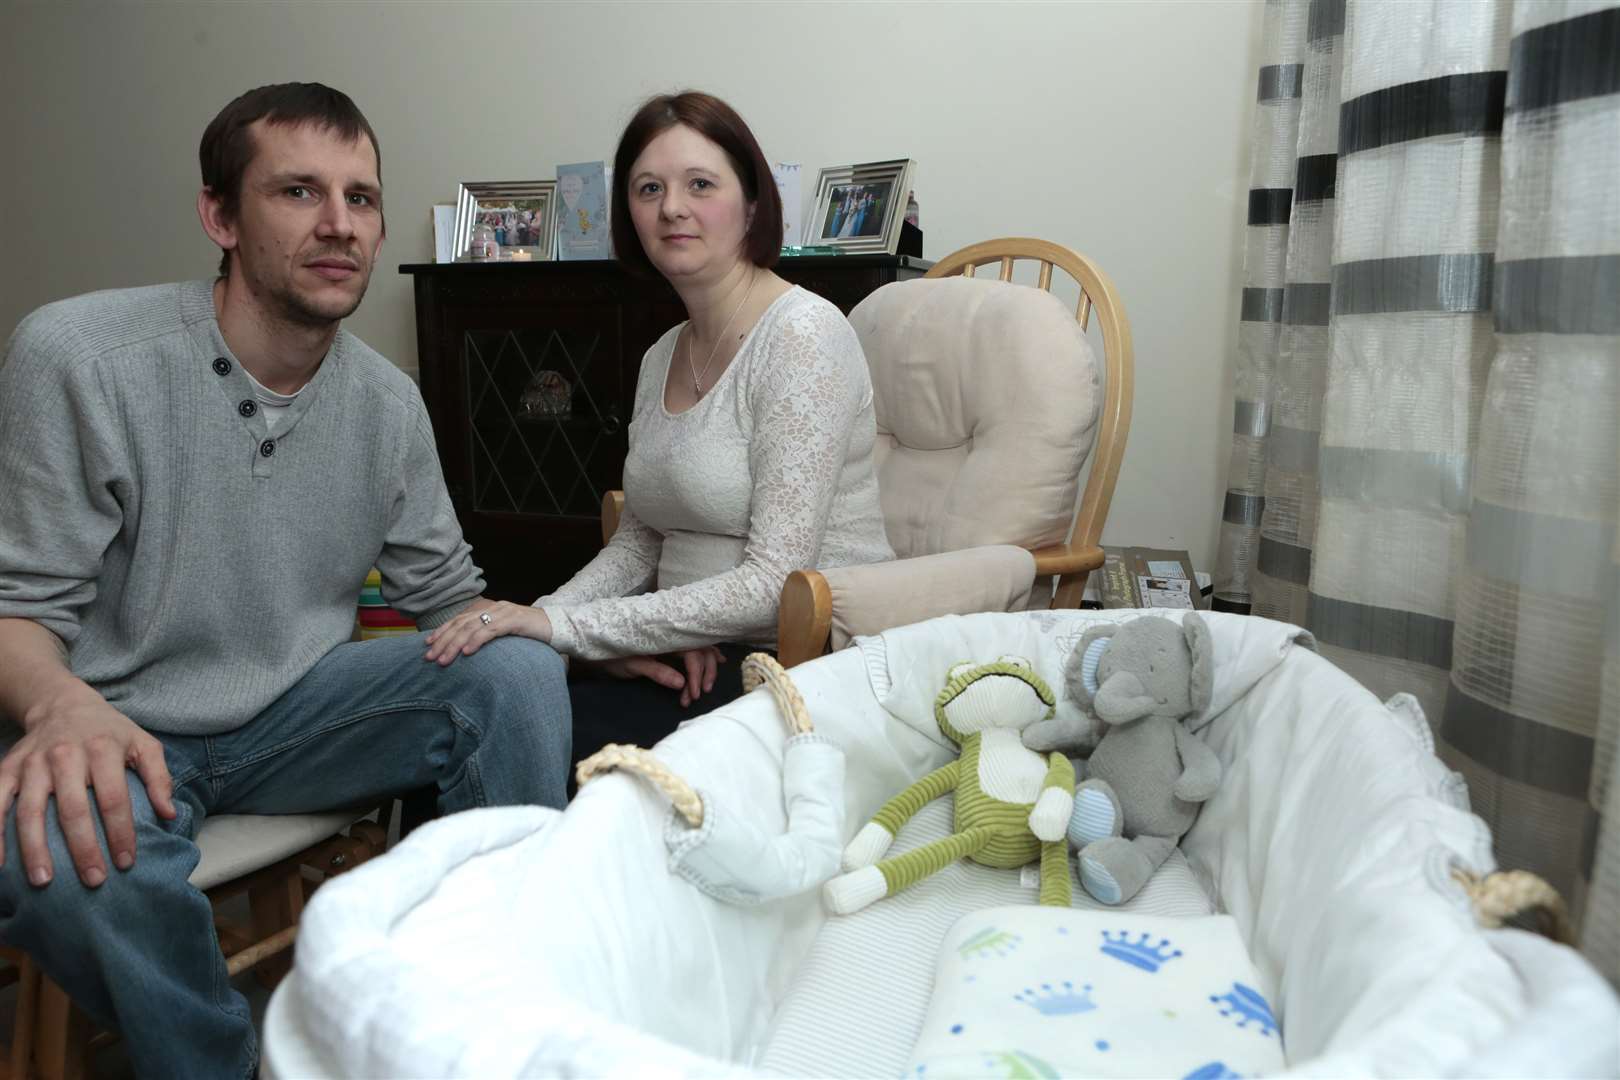 Dennis and Samantha with baby Gabriel's empty cot